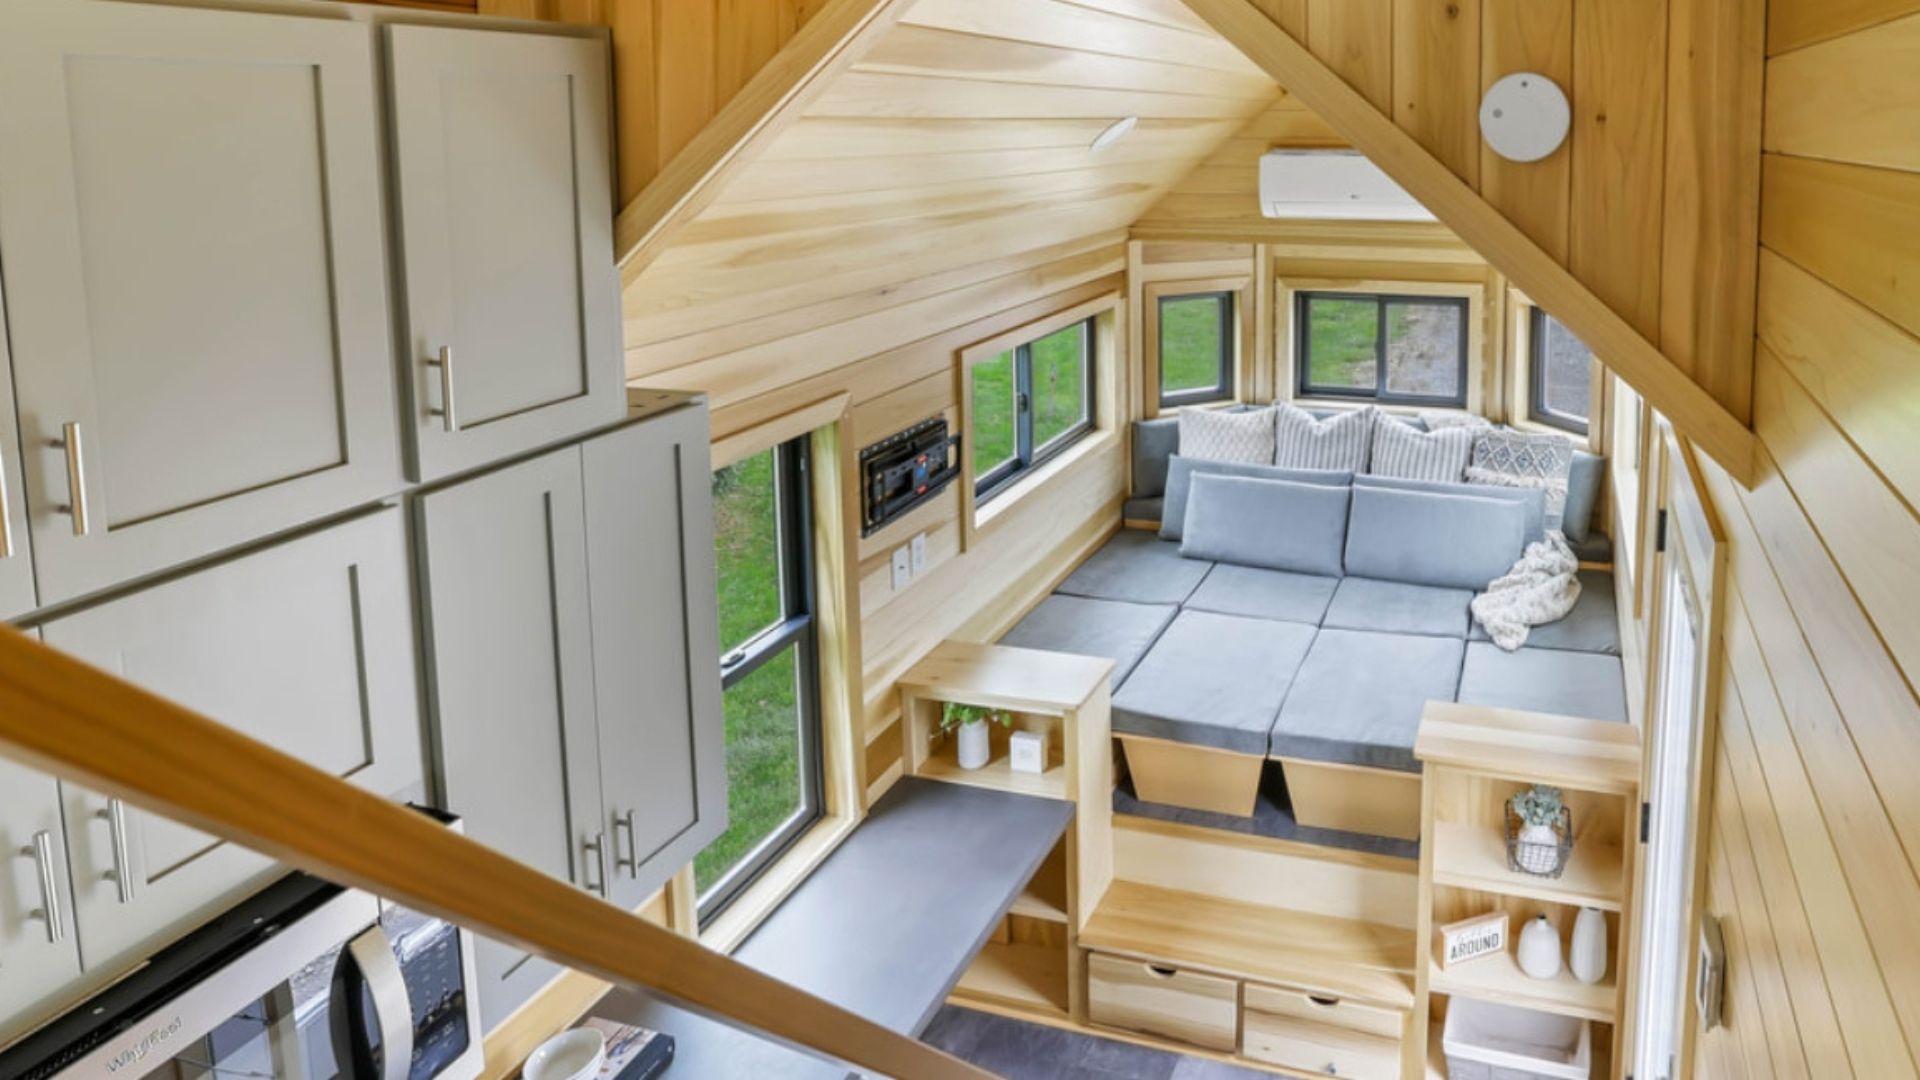 tiny home architecture with bed, kitchen and kitchen cabinets